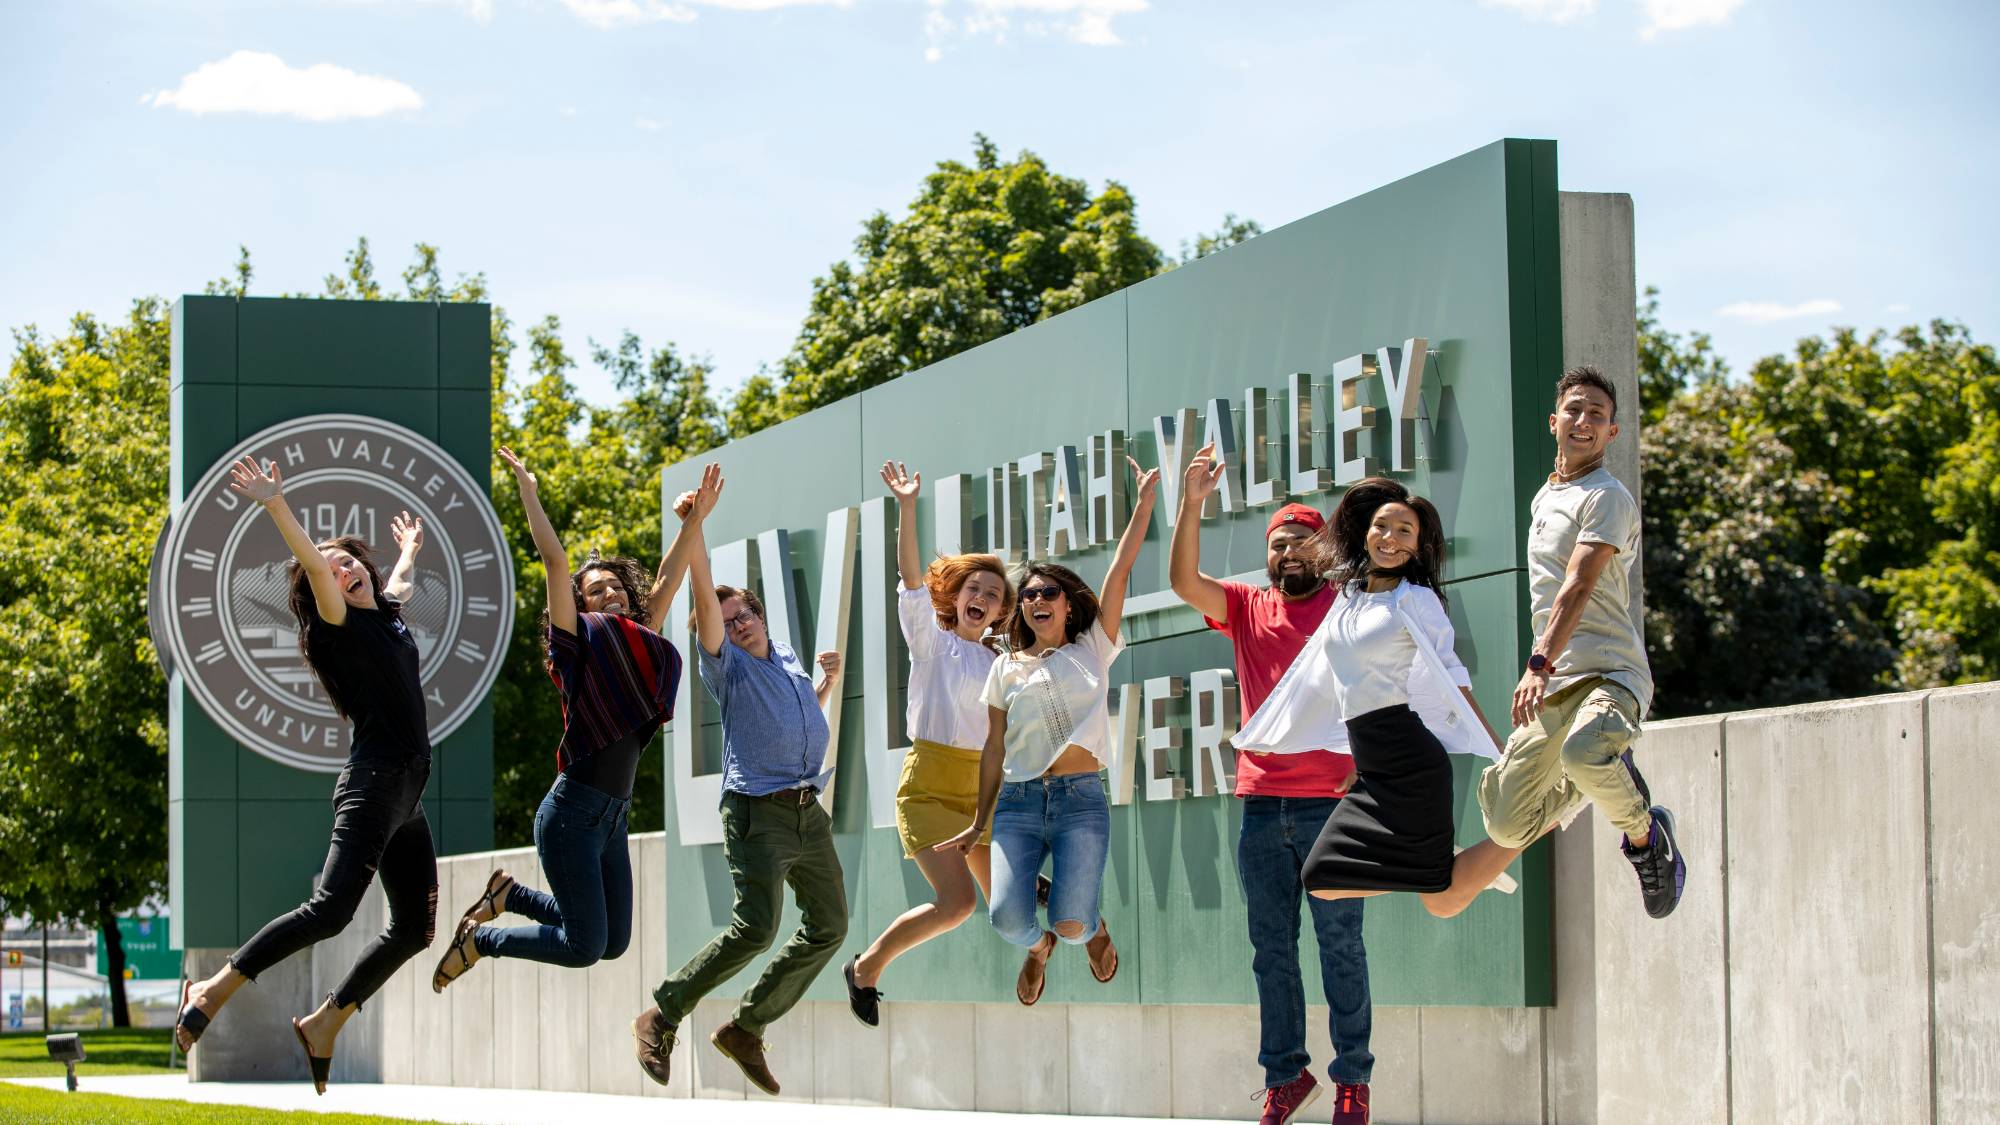 Multicultural Student Center participants in front of UVU entrance.